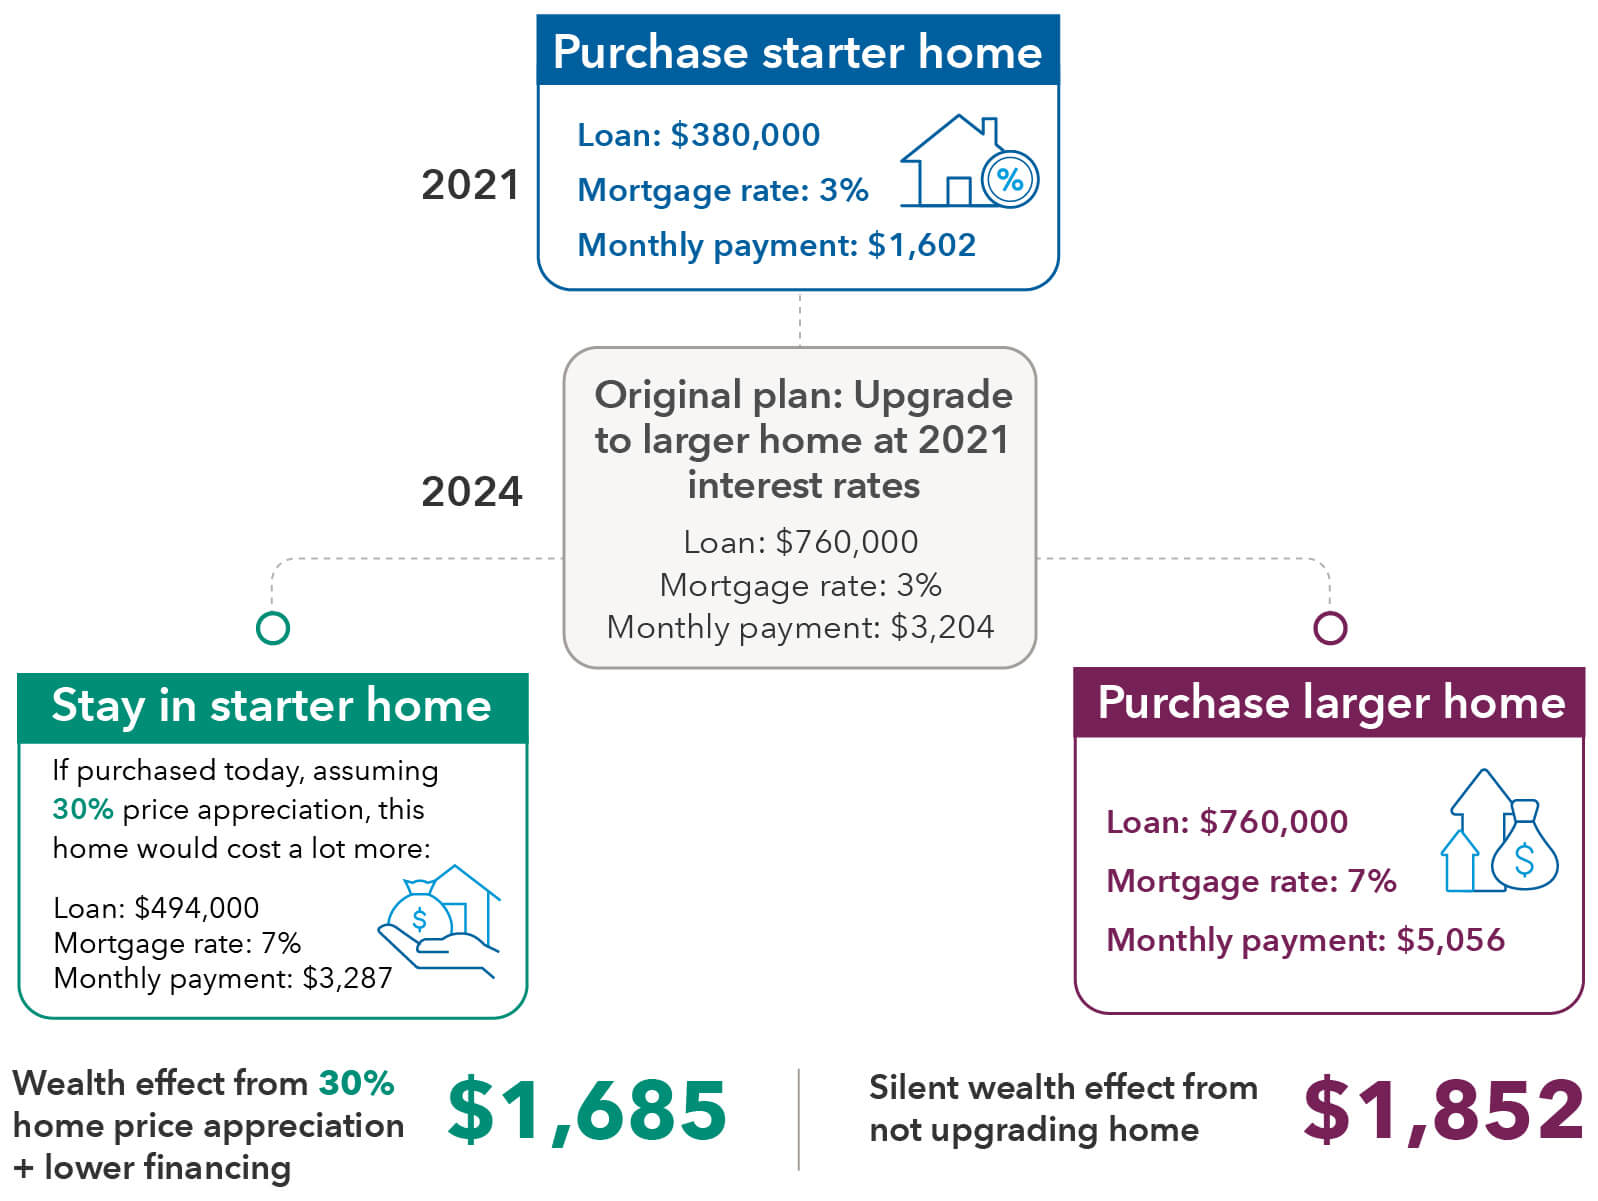 Image shows a flow chart illustrating a hypothetical scenario in which a person purchases a house in 2021 and forgos her original plan to upgrade to a larger home in 2024. On the top level of the flow chart there is a box titled “Purchase starter home” showing in 2021, the homebuyer purchased a home with a $380,000 loan, a mortgage rate of 3% and a monthly payment of $1,602. Below that box is another box for 2024, illustrating the homebuyers original plan to upgrade to a larger home in 2024. This box outlines a scenario using 2021 interest rates of 3% in which the homebuyer purchases a new home with a loan of $760,000 and a monthly payment of $3,204. The box is shaded to indicate that it is not a realistic option in 2024. Below that box are two other boxes illustrating the actual options available to the homeowner. On the left is a box titled “Stay in starter home” to indicate this was the option she chose. This box illustrates how much her starter home would cost in 2024, assuming price appreciation of 30% and interest rates of 7%. At this price and rate, the home would cost a homebuyer $3,287 per month. On the right there is a red box titled “Purchase larger home” to indicate this option was not chosen. This box illustrates a scenario in which the homeowner chose to buy a new home with a loan of $760,000, a mortgage rate of 7% and a monthly payment of $5,056. At the bottom of the chart, there is text outlining the hypothetical “wealth effects” accruing to the homeowner. The left reads “Wealth effect from 30% home price appreciation + lower financing. $1,685.” The right reads “Silent wealth effect from not upgrading home. $1,852.”